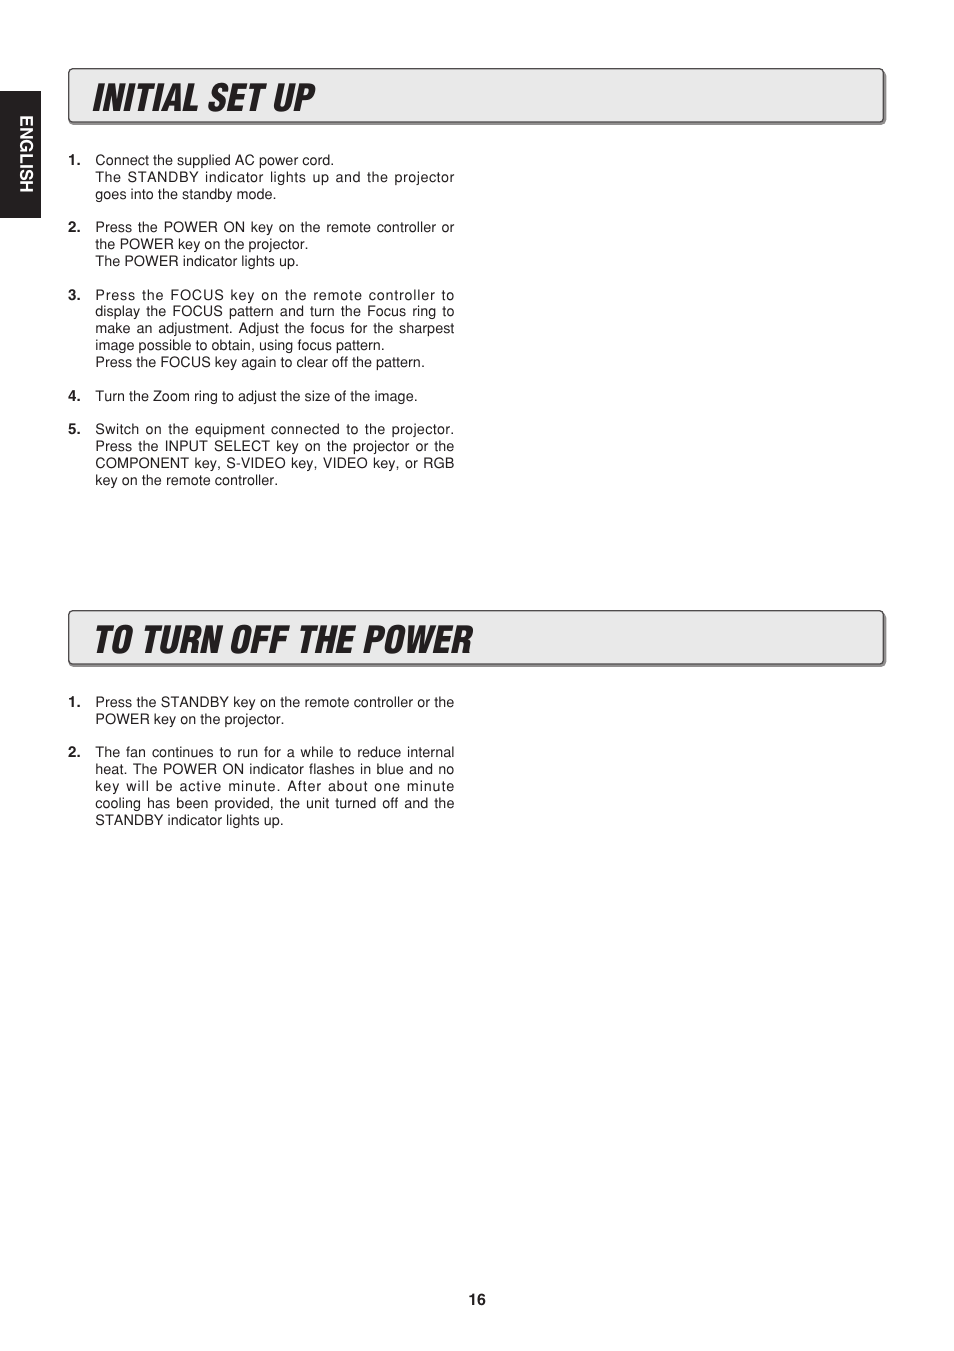 Initial set up to turn off the power | Marantz VP-12S1s User Manual | Page 20 / 30